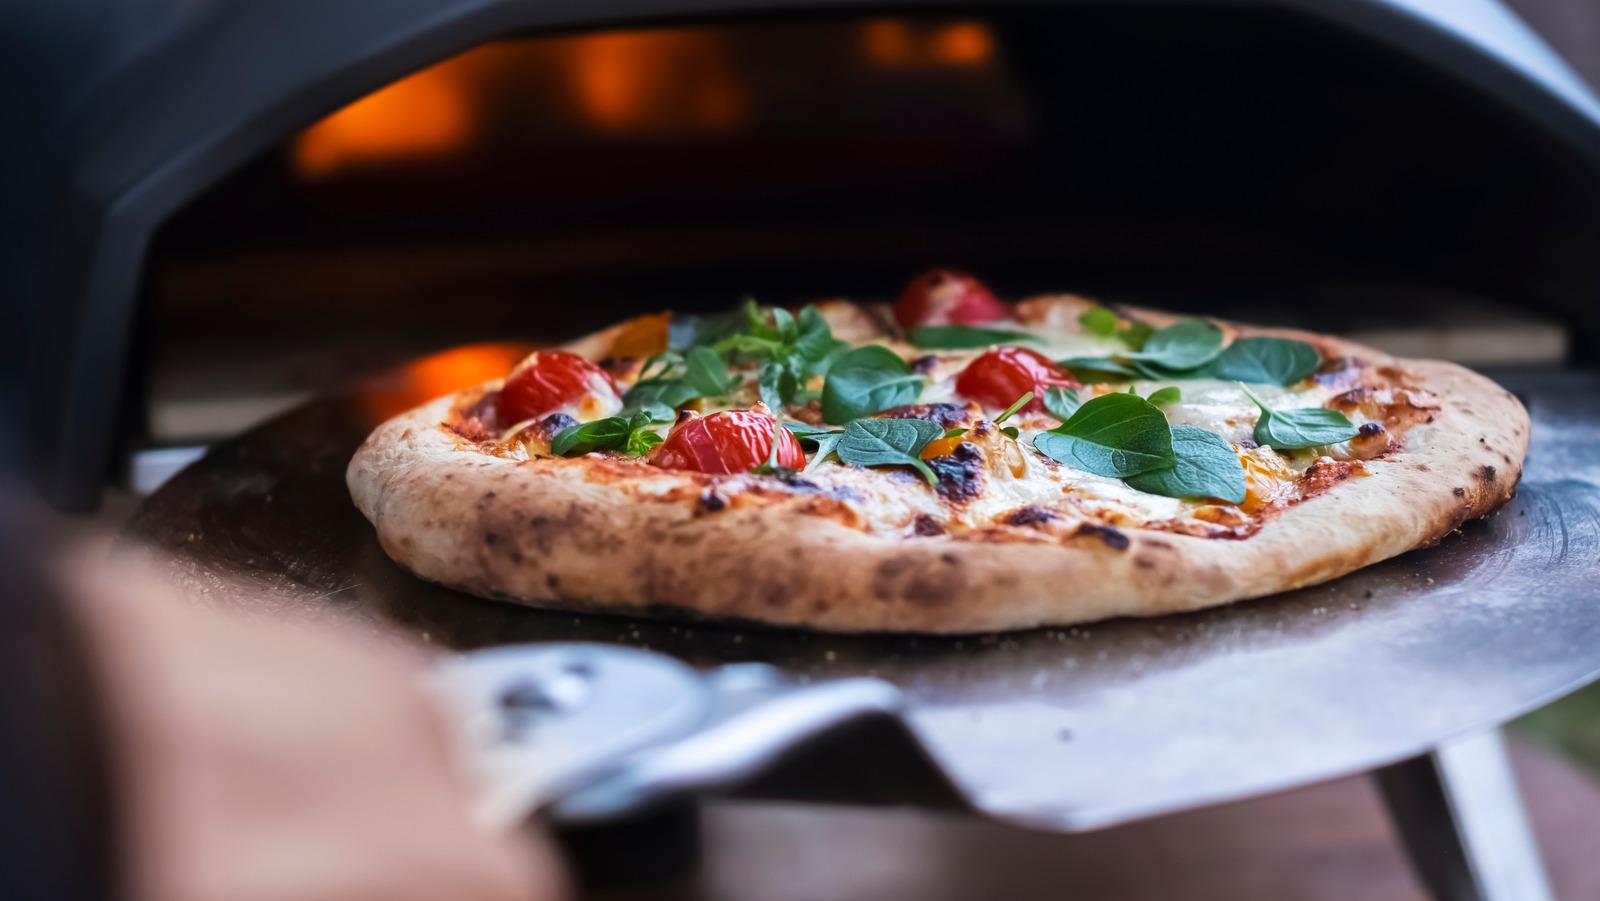 5 Of The Best Outdoor Pizza Ovens Ranked, Best To Worst